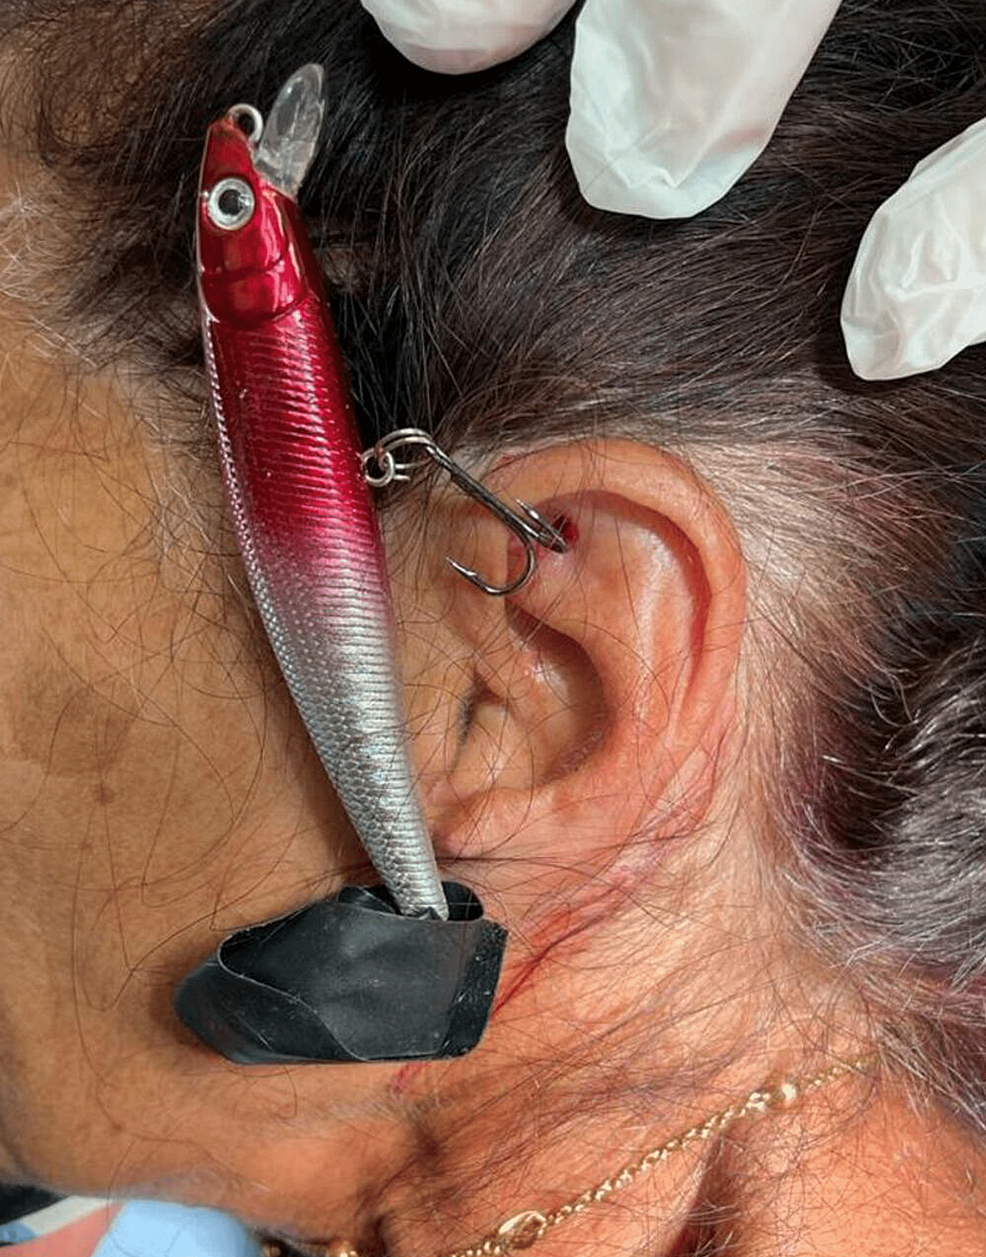 Cureus  CUT BARB (an Acronym for Fishhook Injuries): Illustrated